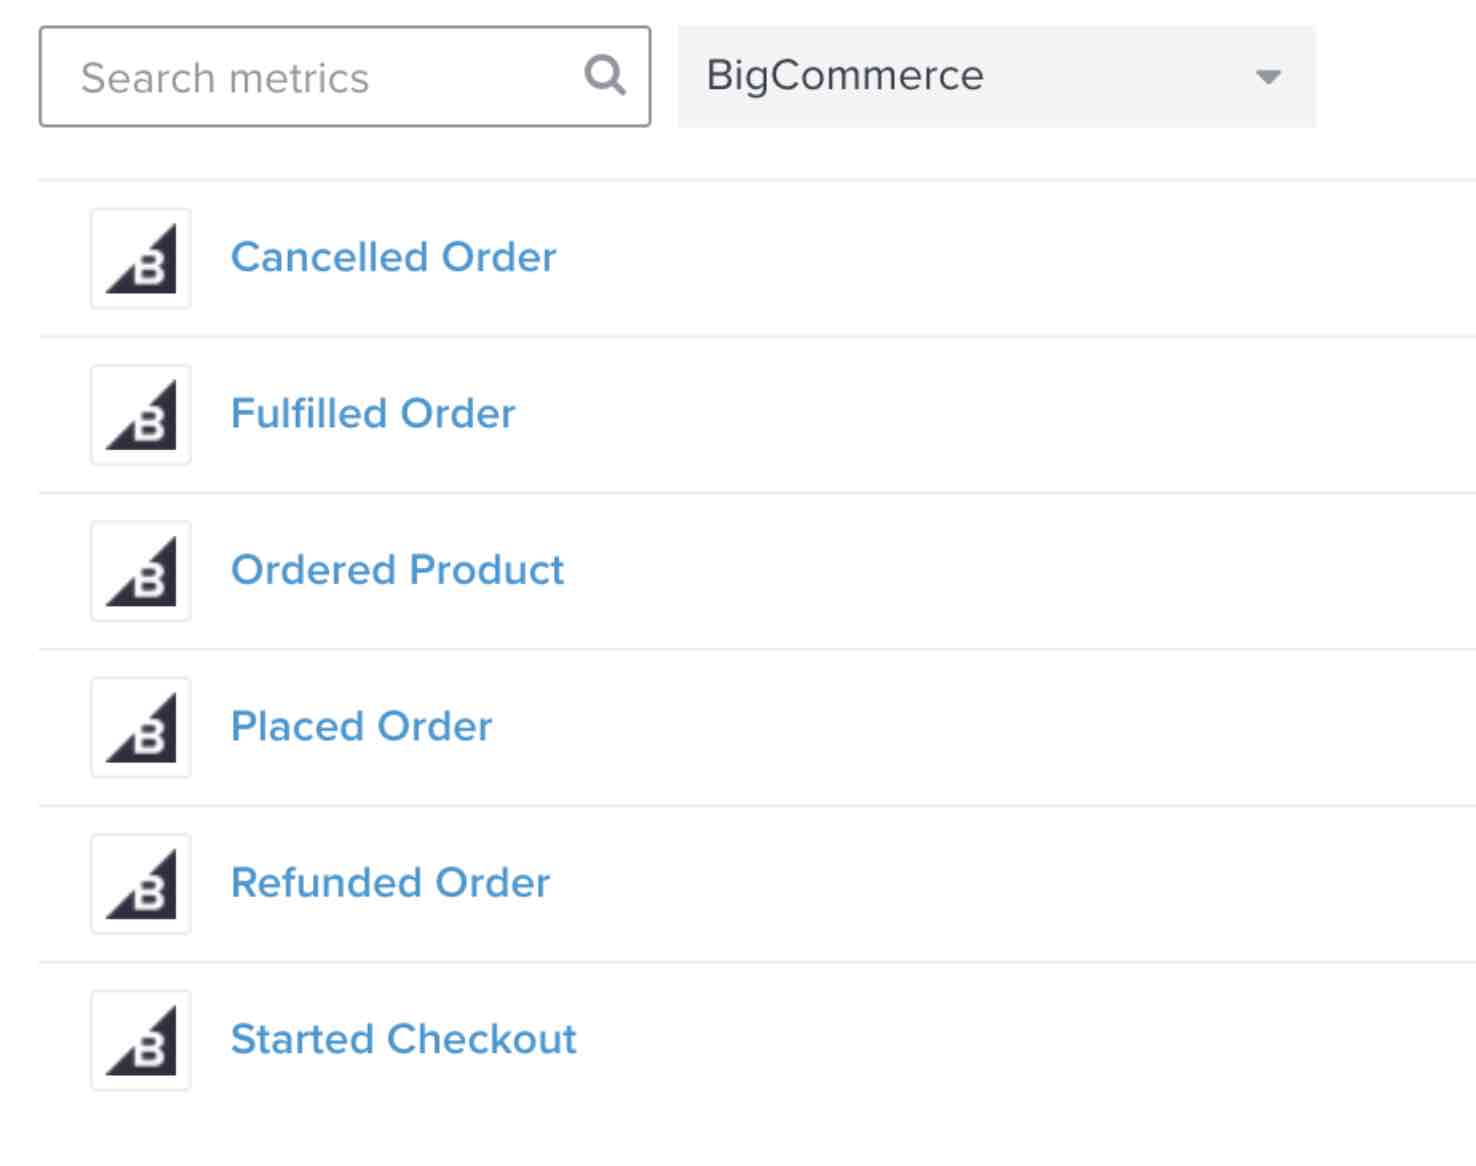 Metrics tab in Klaviyo filtered by BigCommerce showing metrics list including Cancelled Order and Fulfilled Order